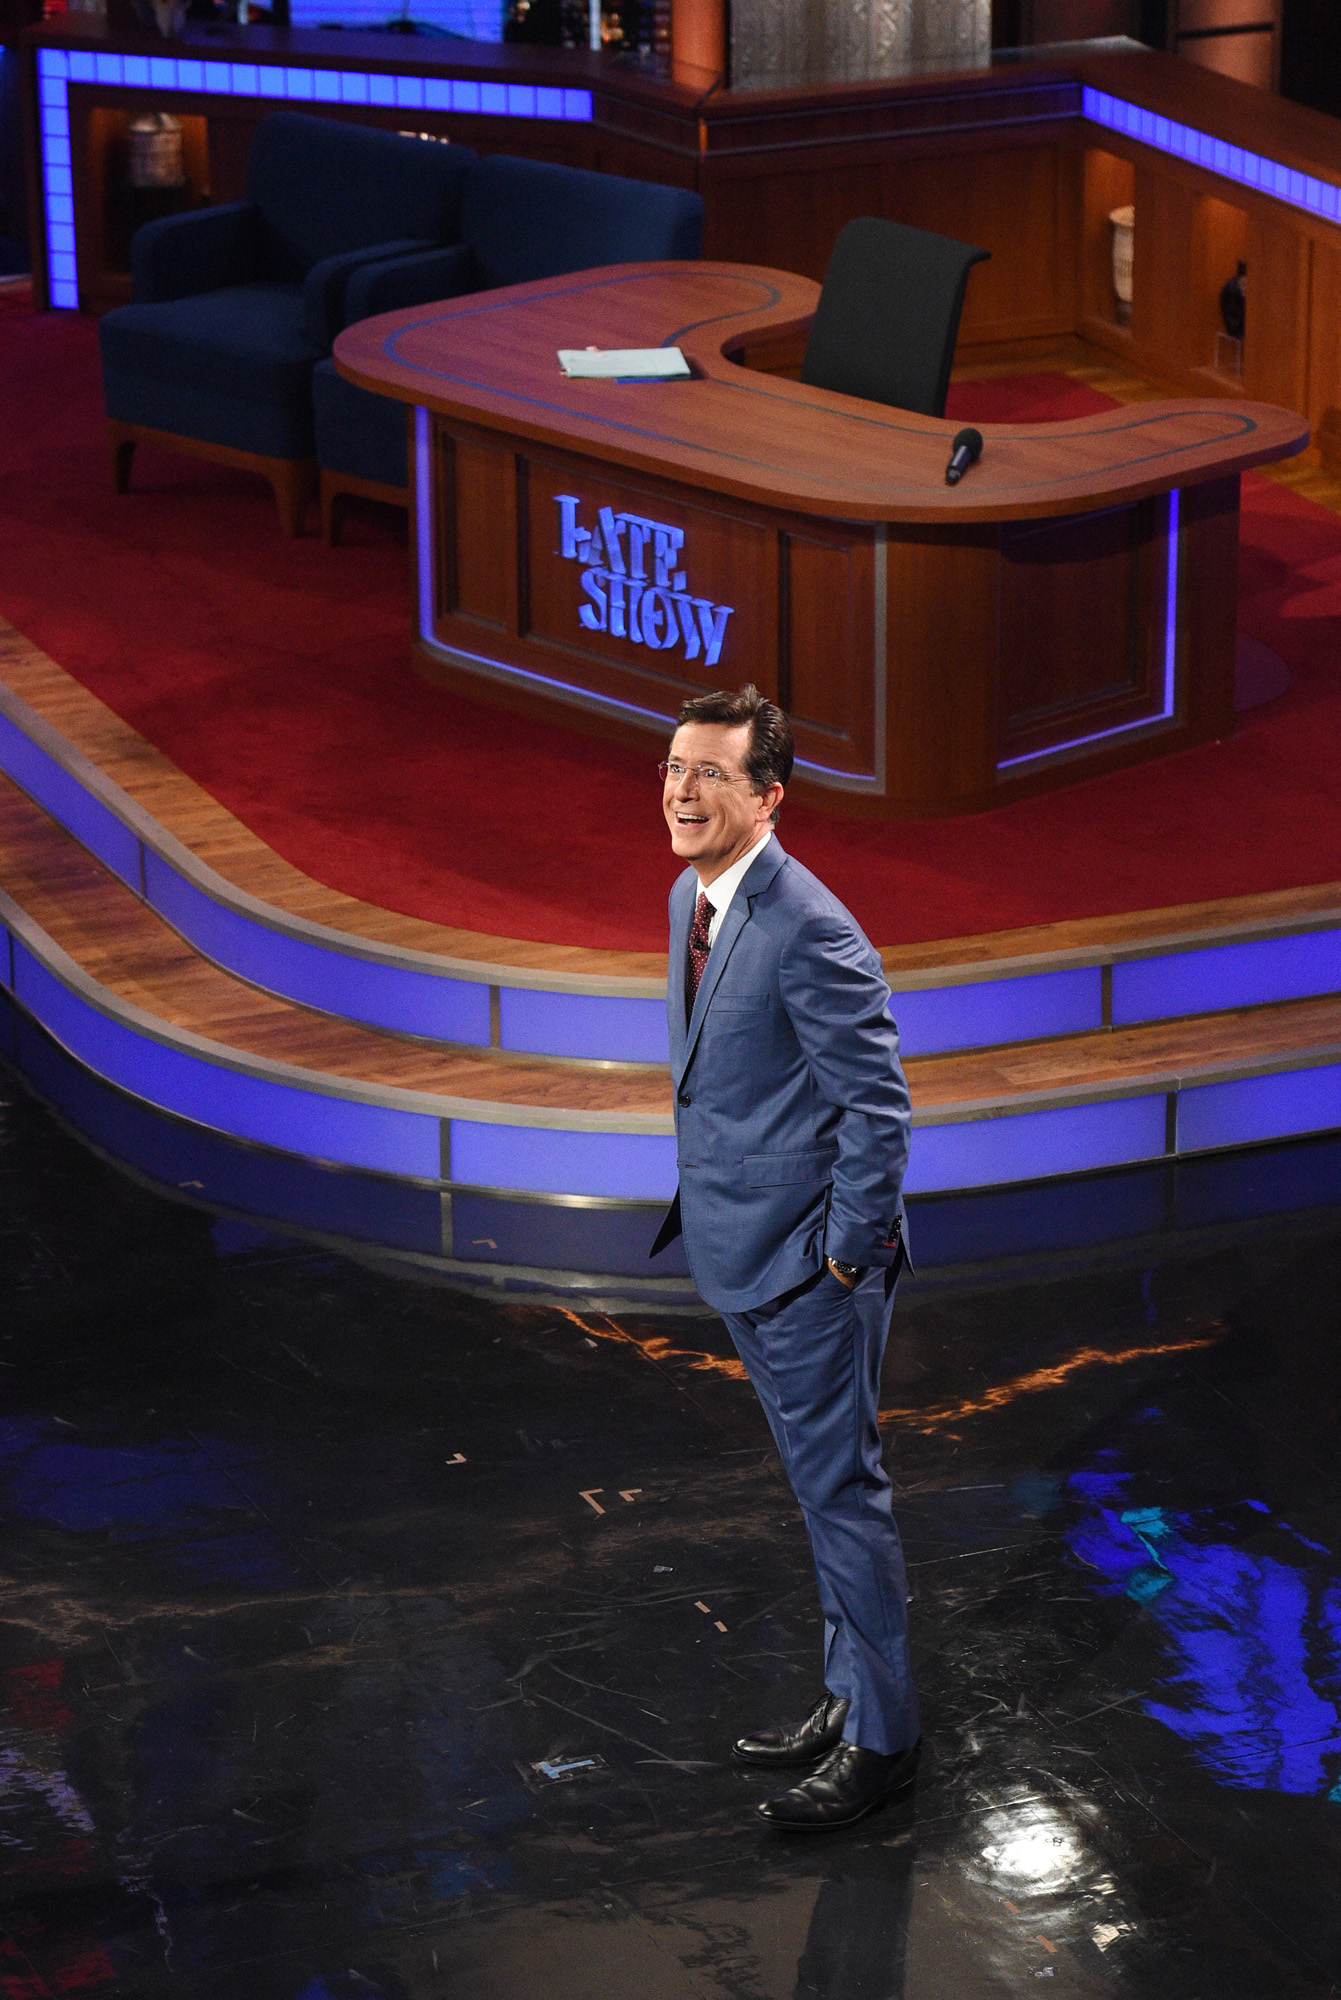 Stephen Colbert during the premiere episode of "The Late Show with Stephen Colbert" on Sept. 8, 2015.